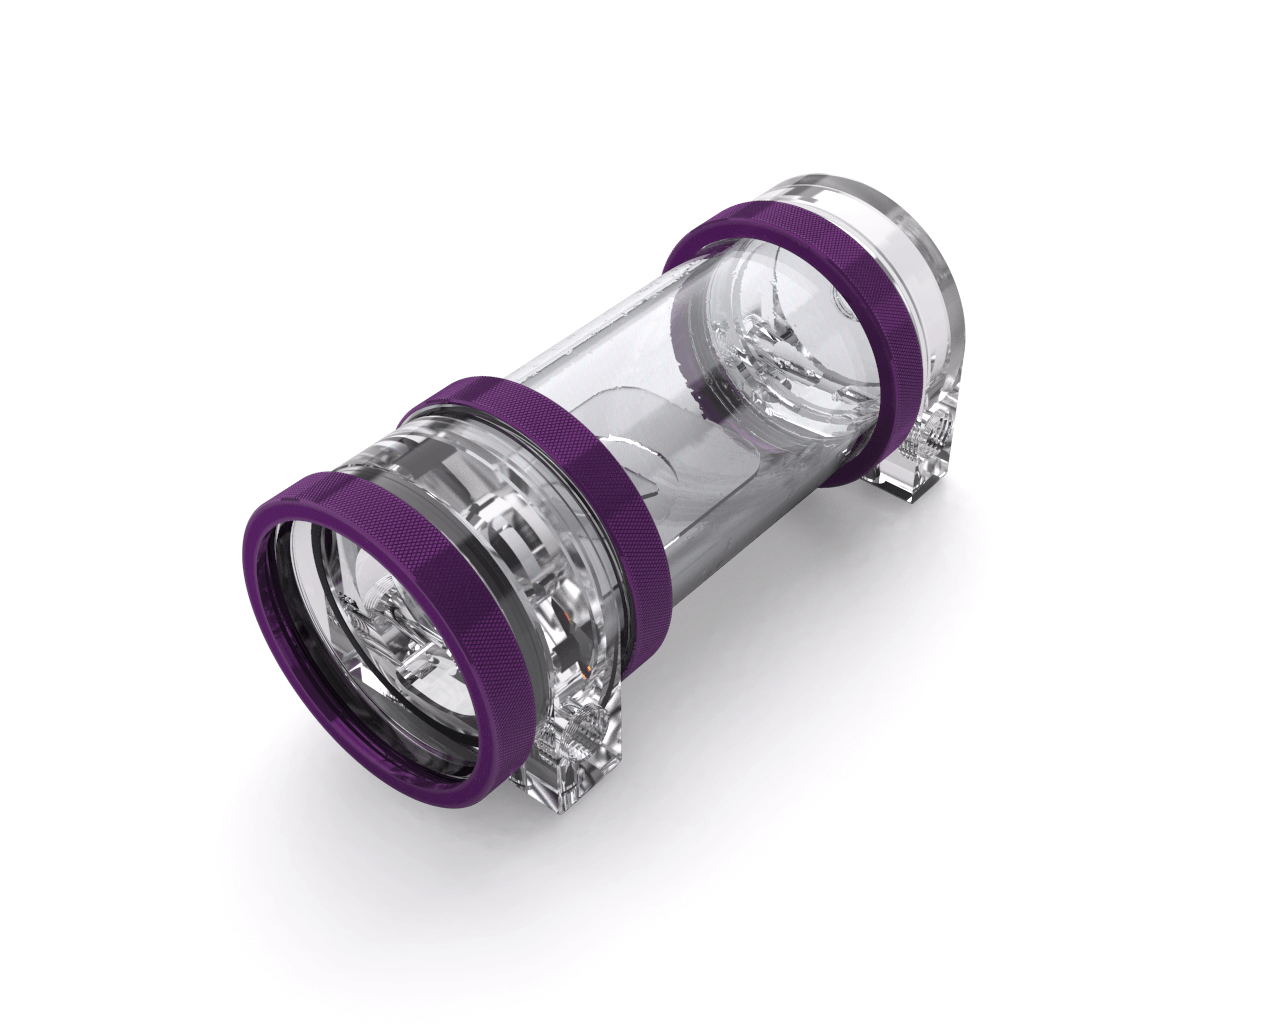 PrimoChill CTR Hard Mount Phase II High Flow D5 Enabled Reservoir - Clear PMMA - 120mm - PrimoChill - KEEPING IT COOL Candy Purple